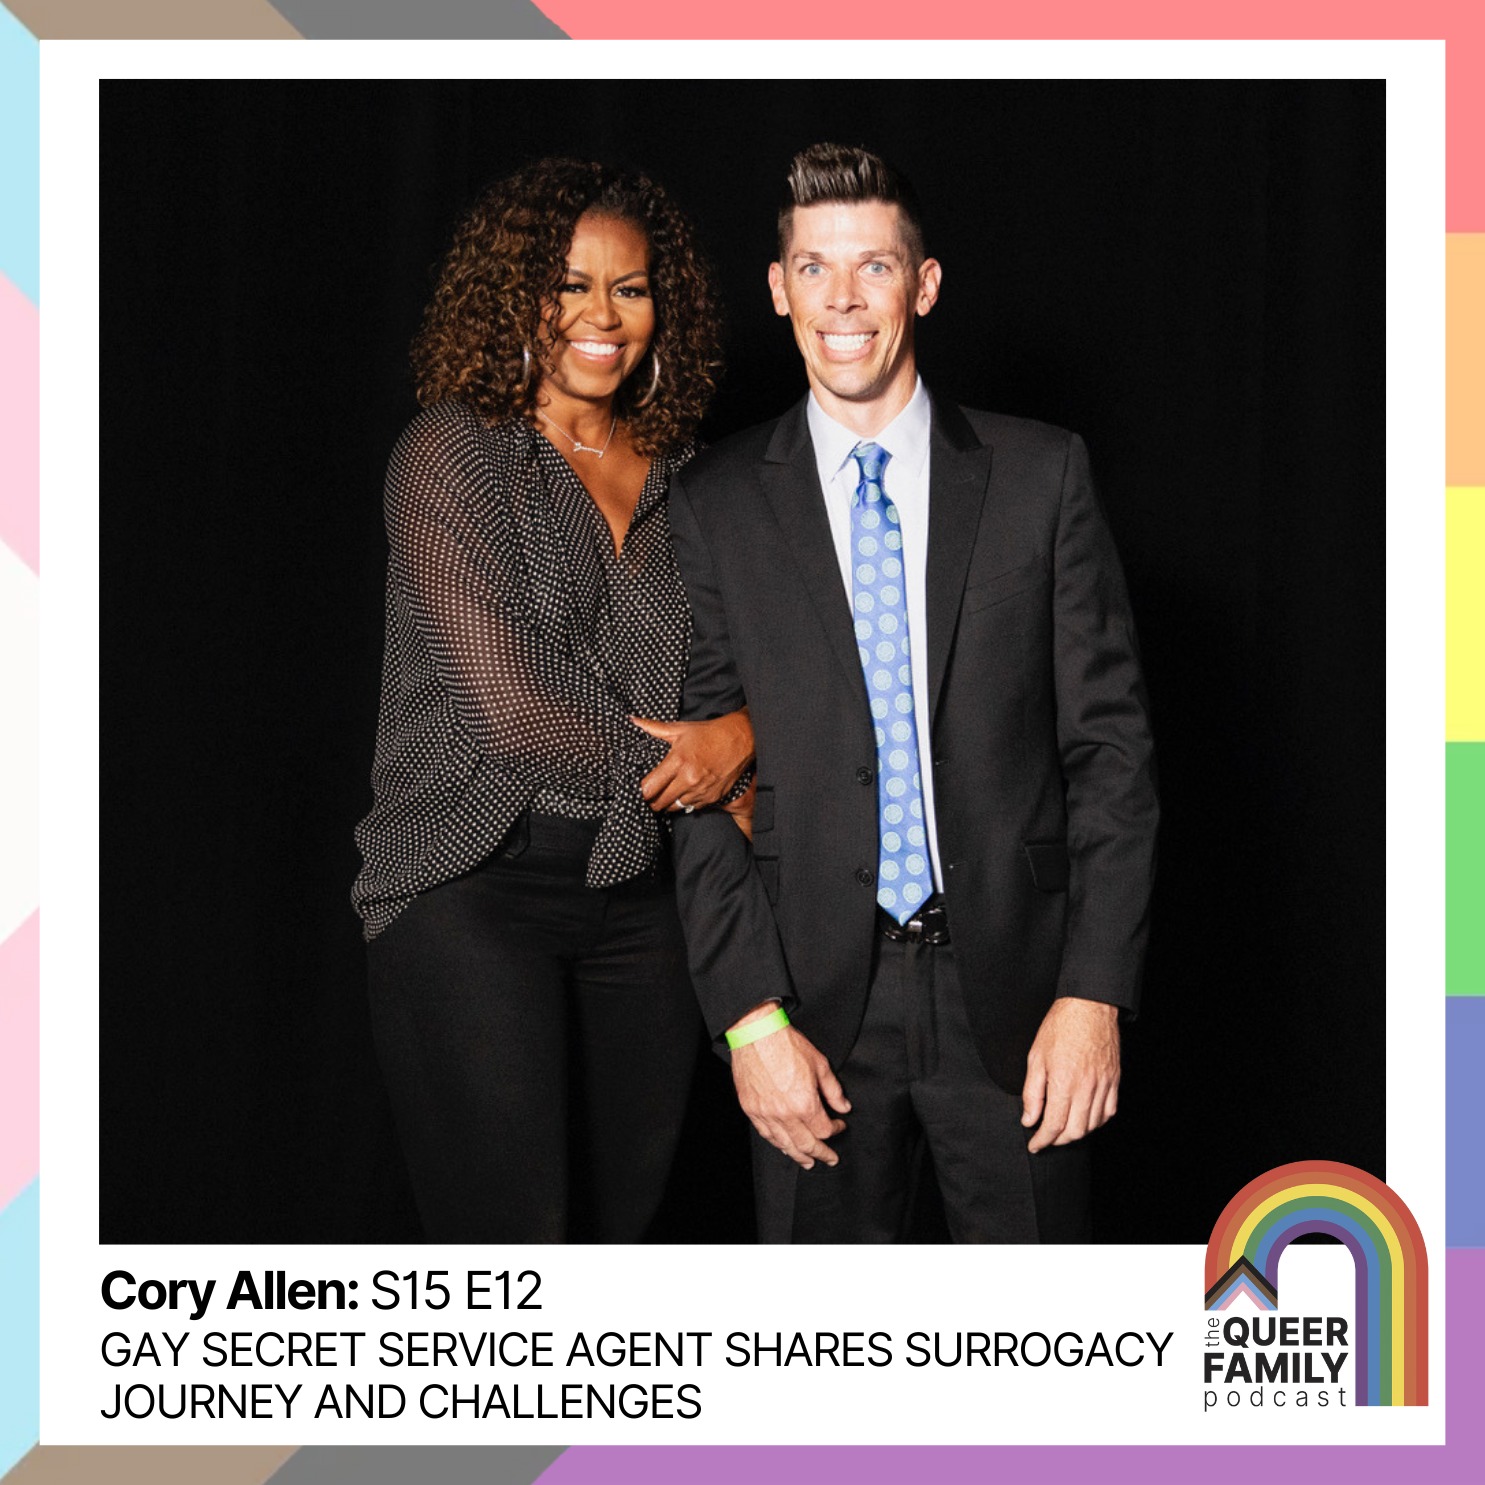 Gay Secret Service Agent Shares Surrogacy Journey and Challenges